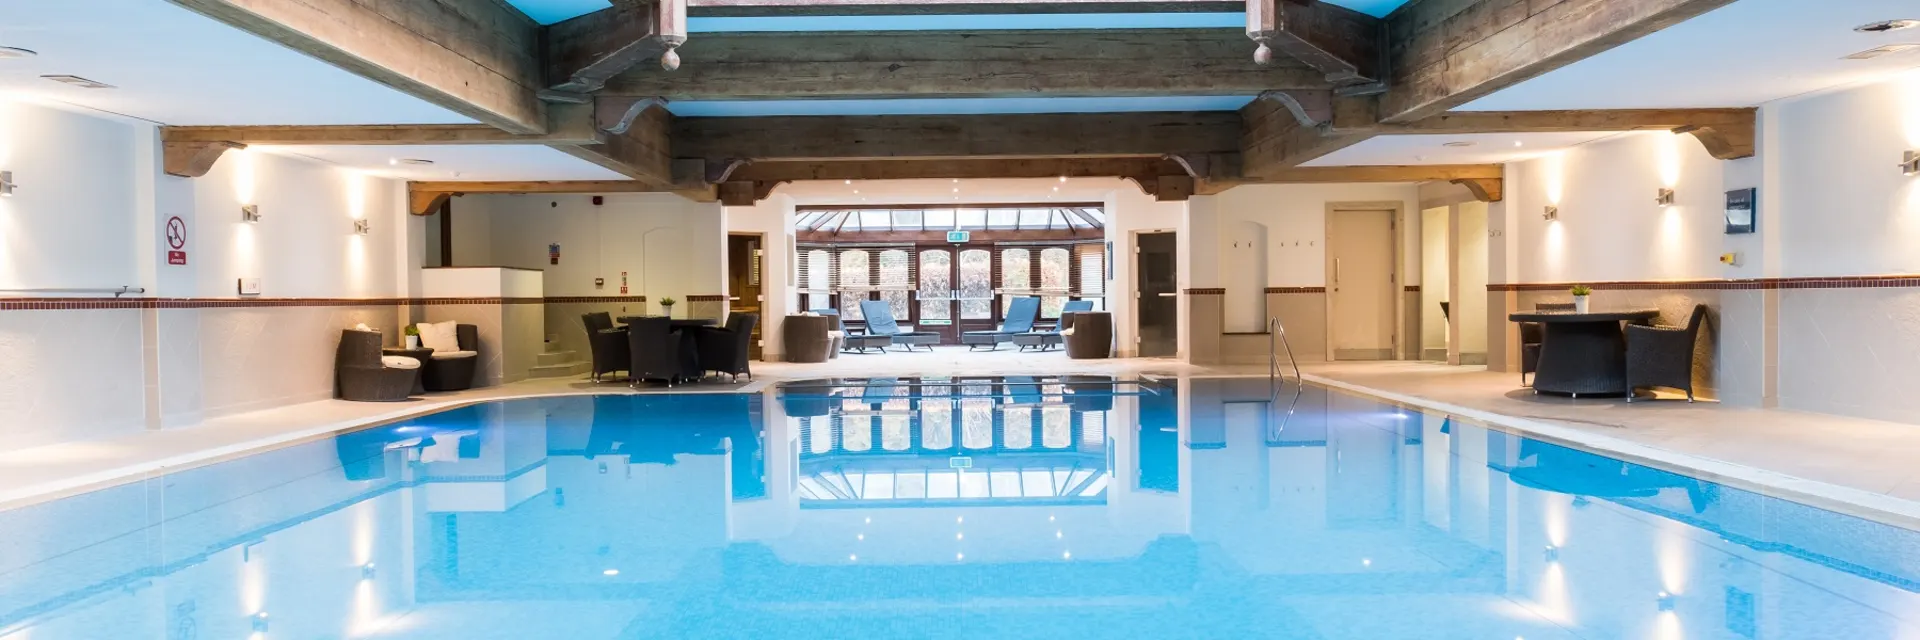 Solent Hotel And Spa